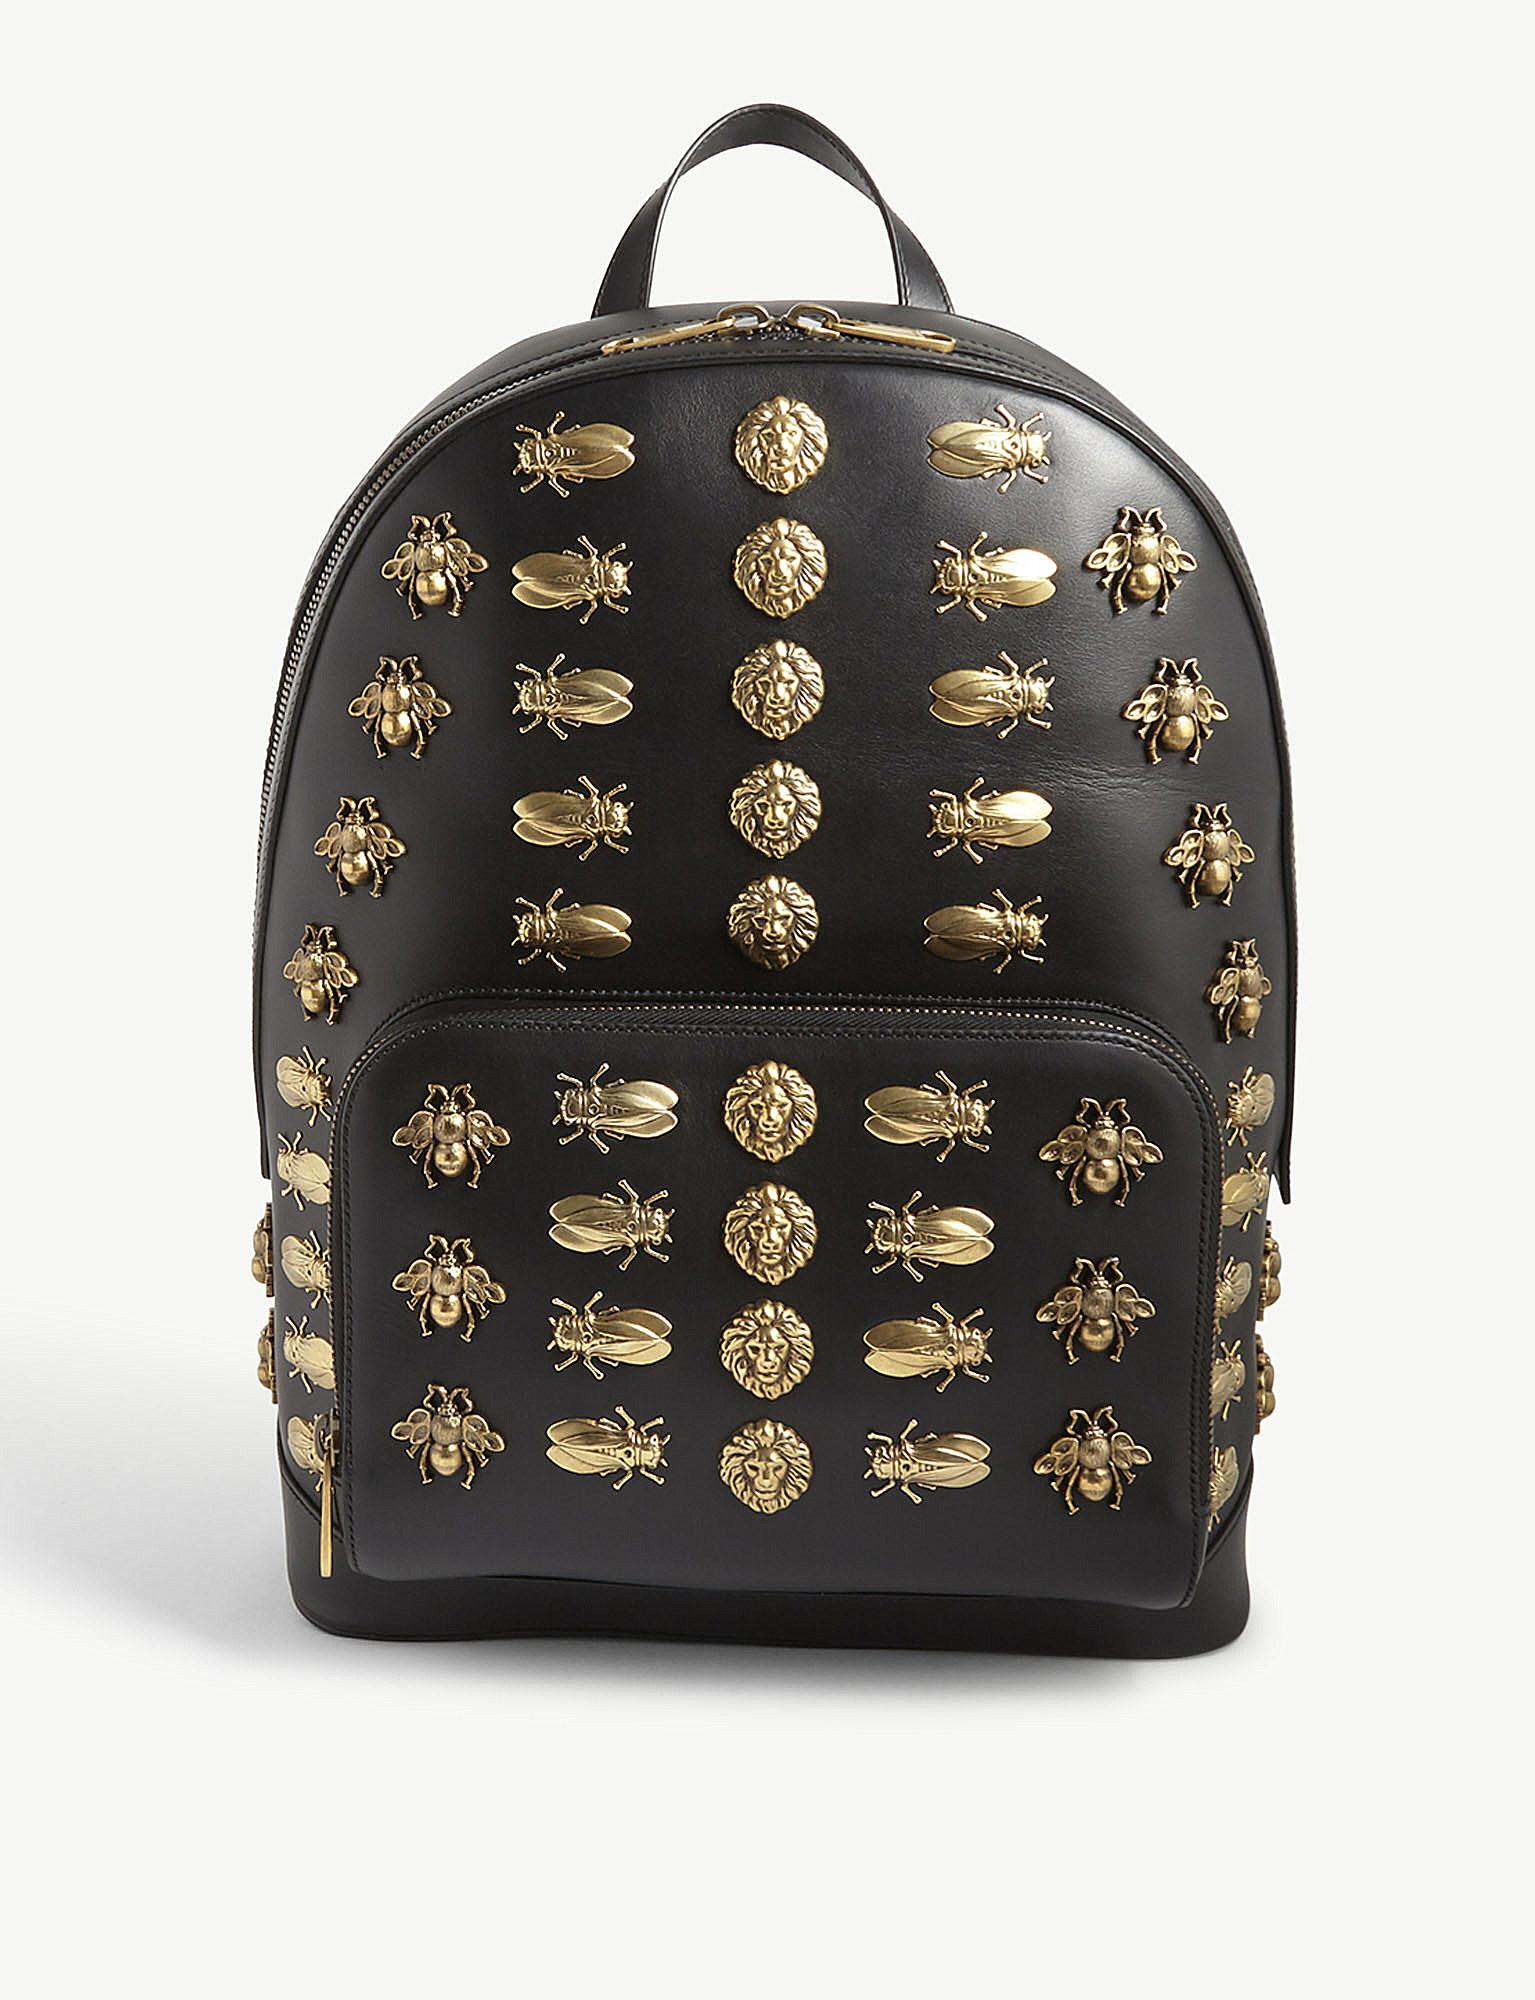 Gucci Brass Insects Leather Backpack in 